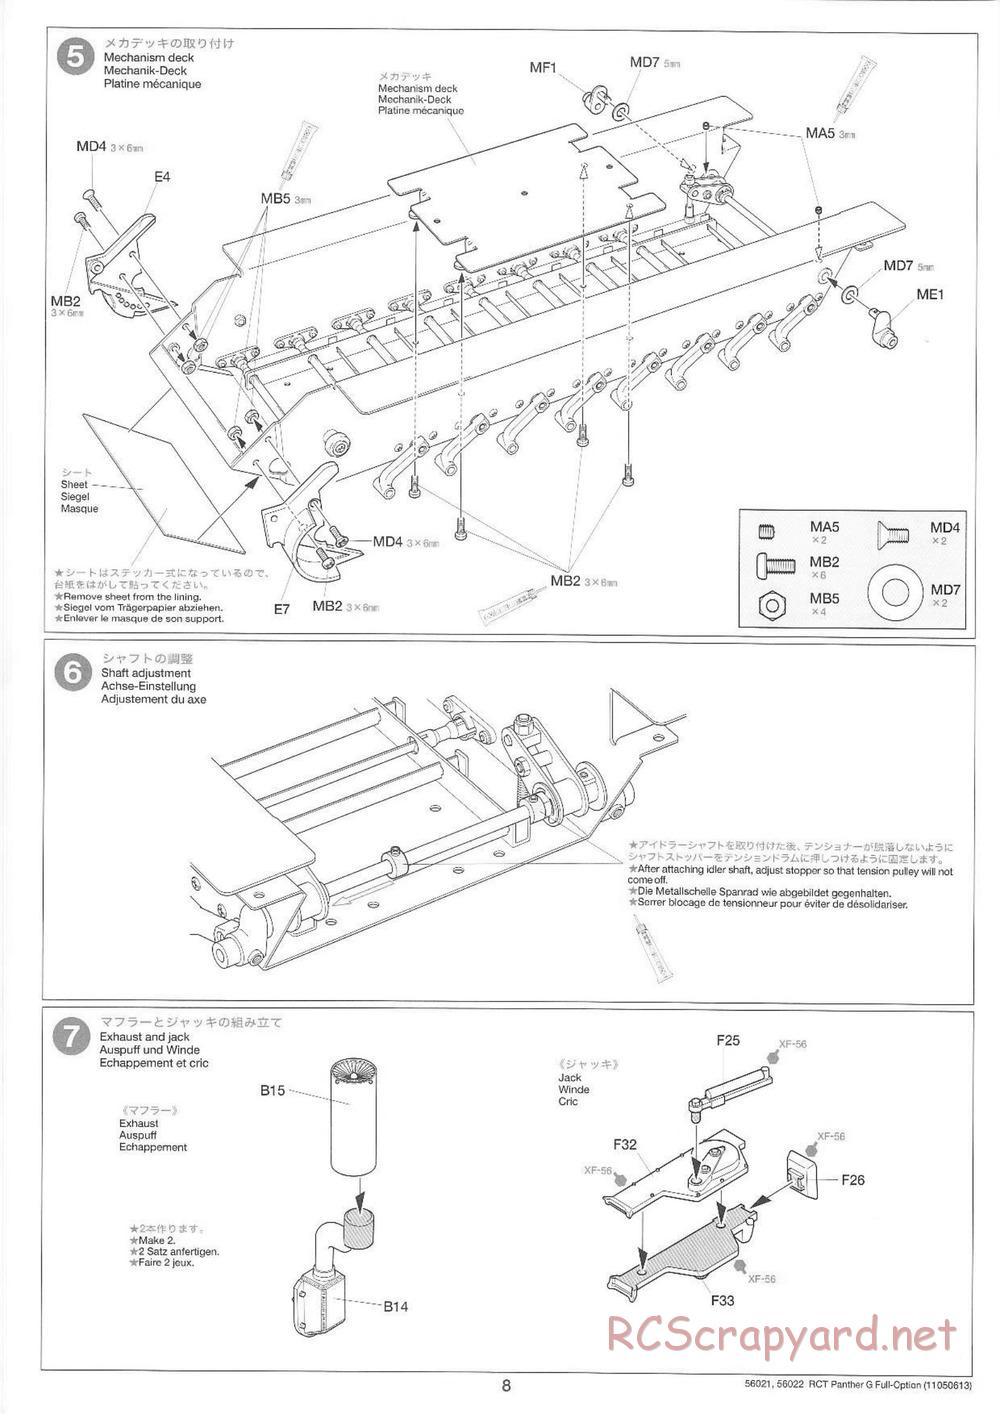 Tamiya - Panther Type G - 1/16 Scale Chassis - Manual - Page 8